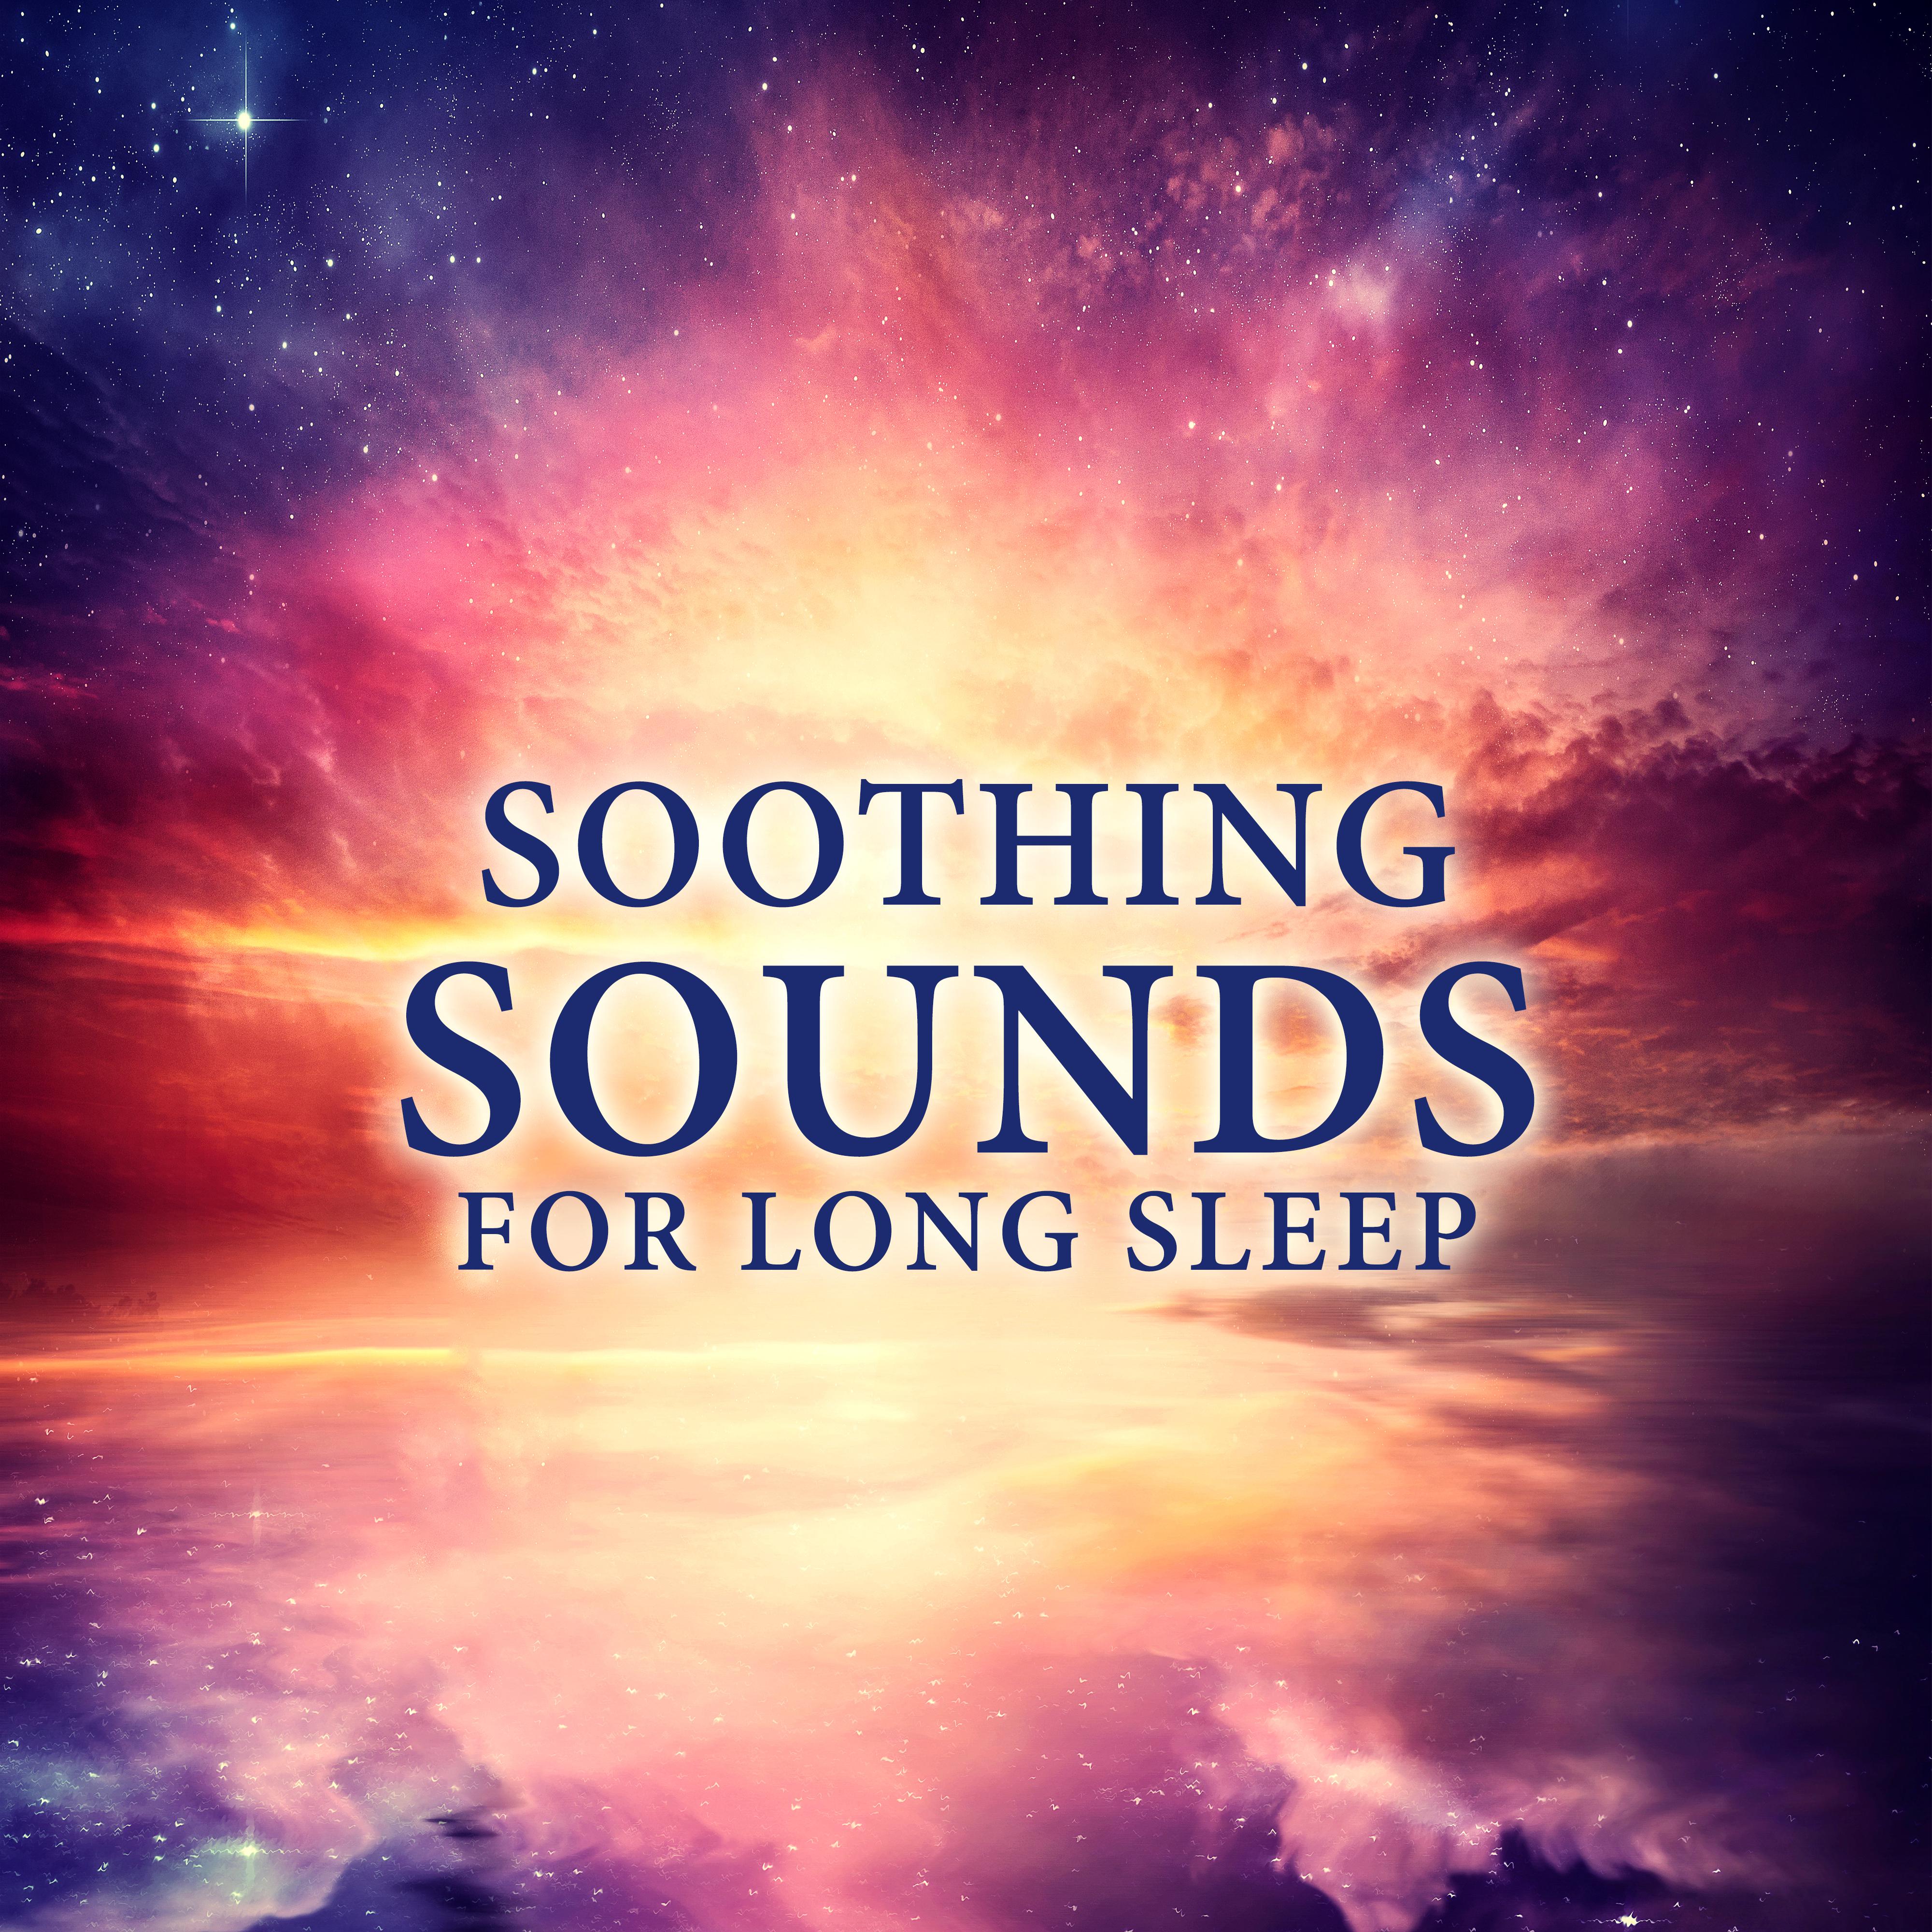 Soothing Sounds for Long Sleep – Relaxing Time, Melodies to Fall Asleep, Rest with New Age Music, Mind Rest